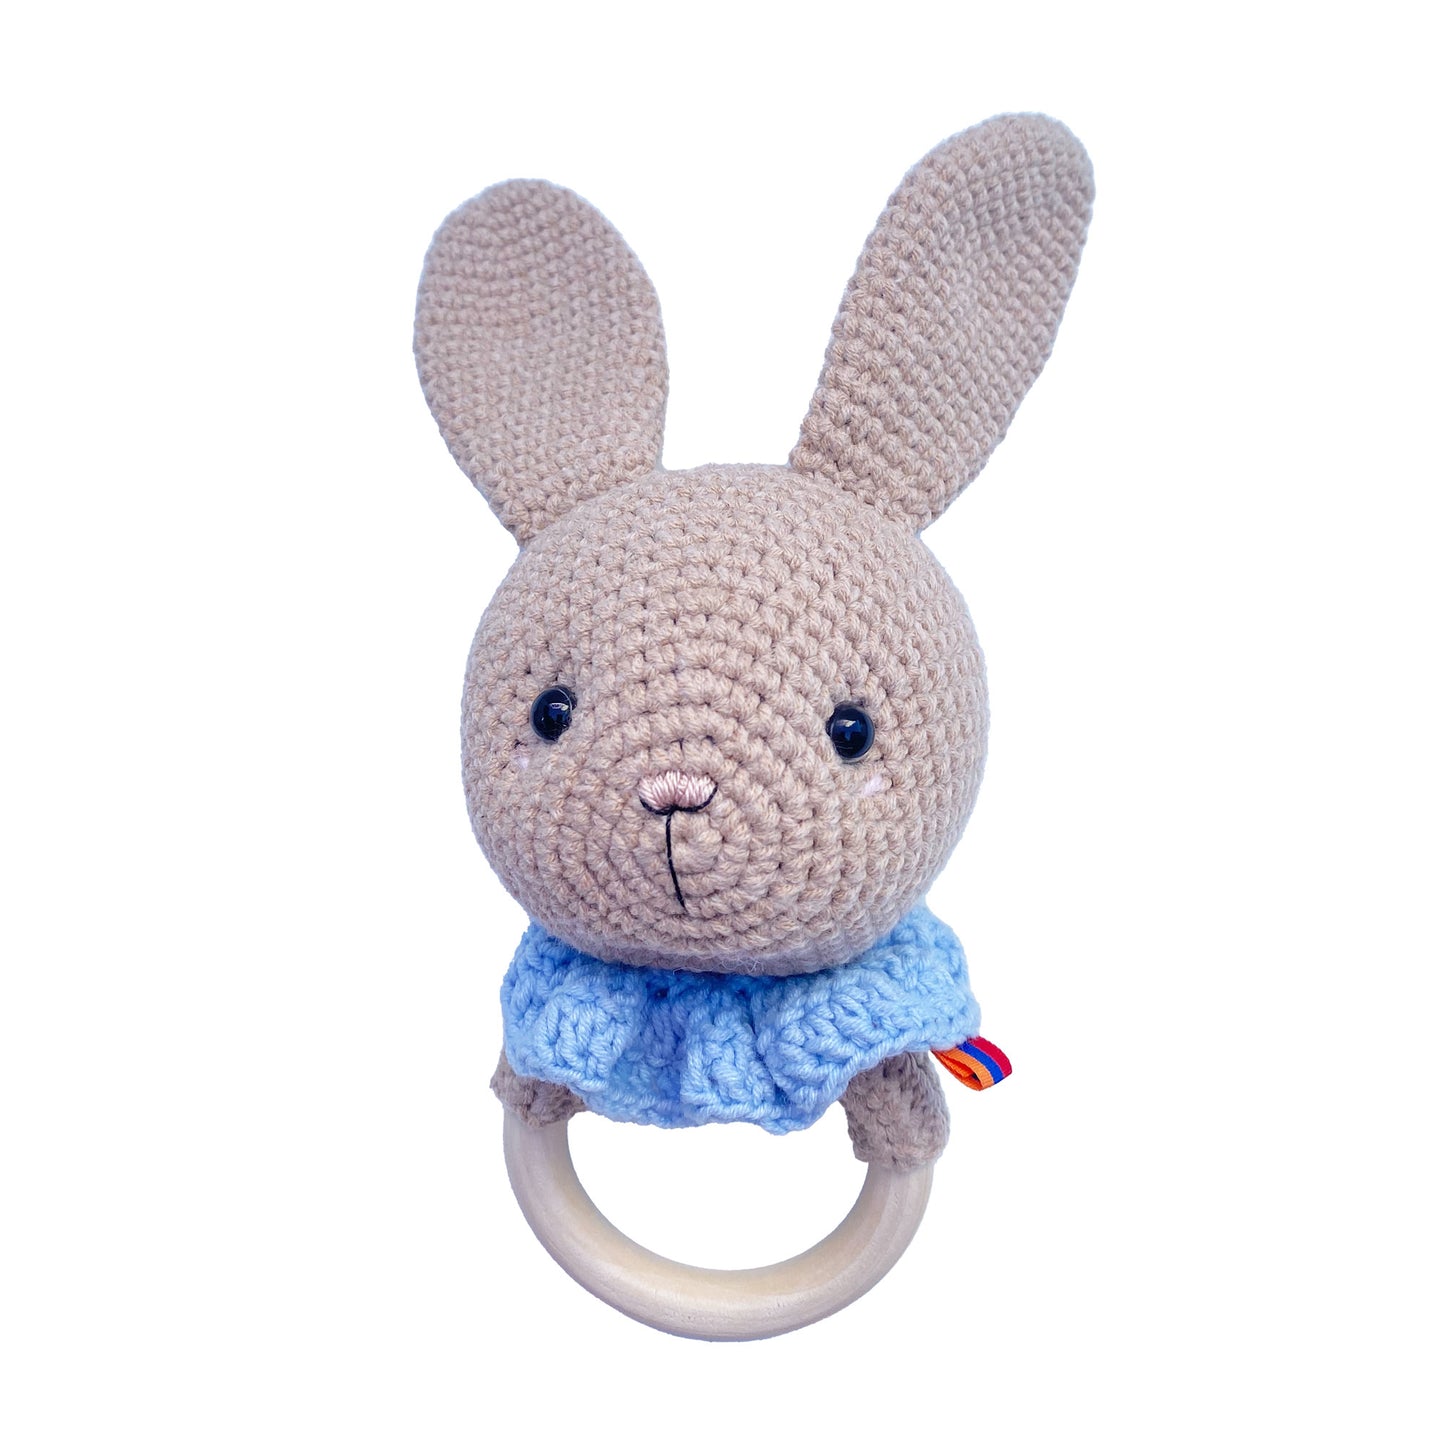 Blue Lulibear Bunny Rattles nursery first toy/ Newborn baby rattle toy/Neutral bunny teether/ Expecting mom gift